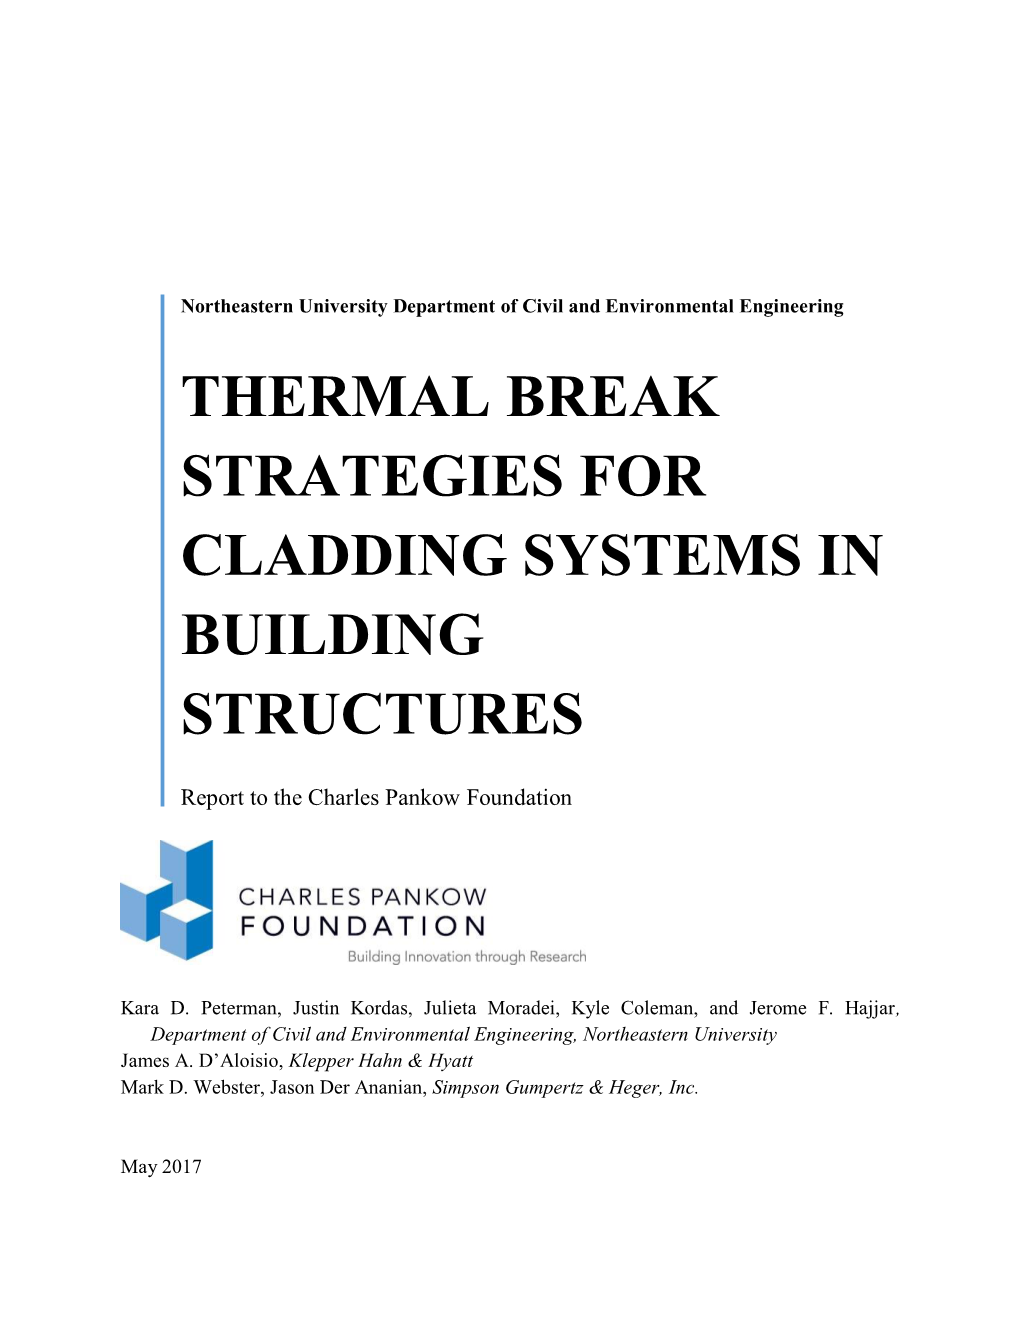 Thermal Break Strategies for Cladding Systems in Building Structures: Part 1